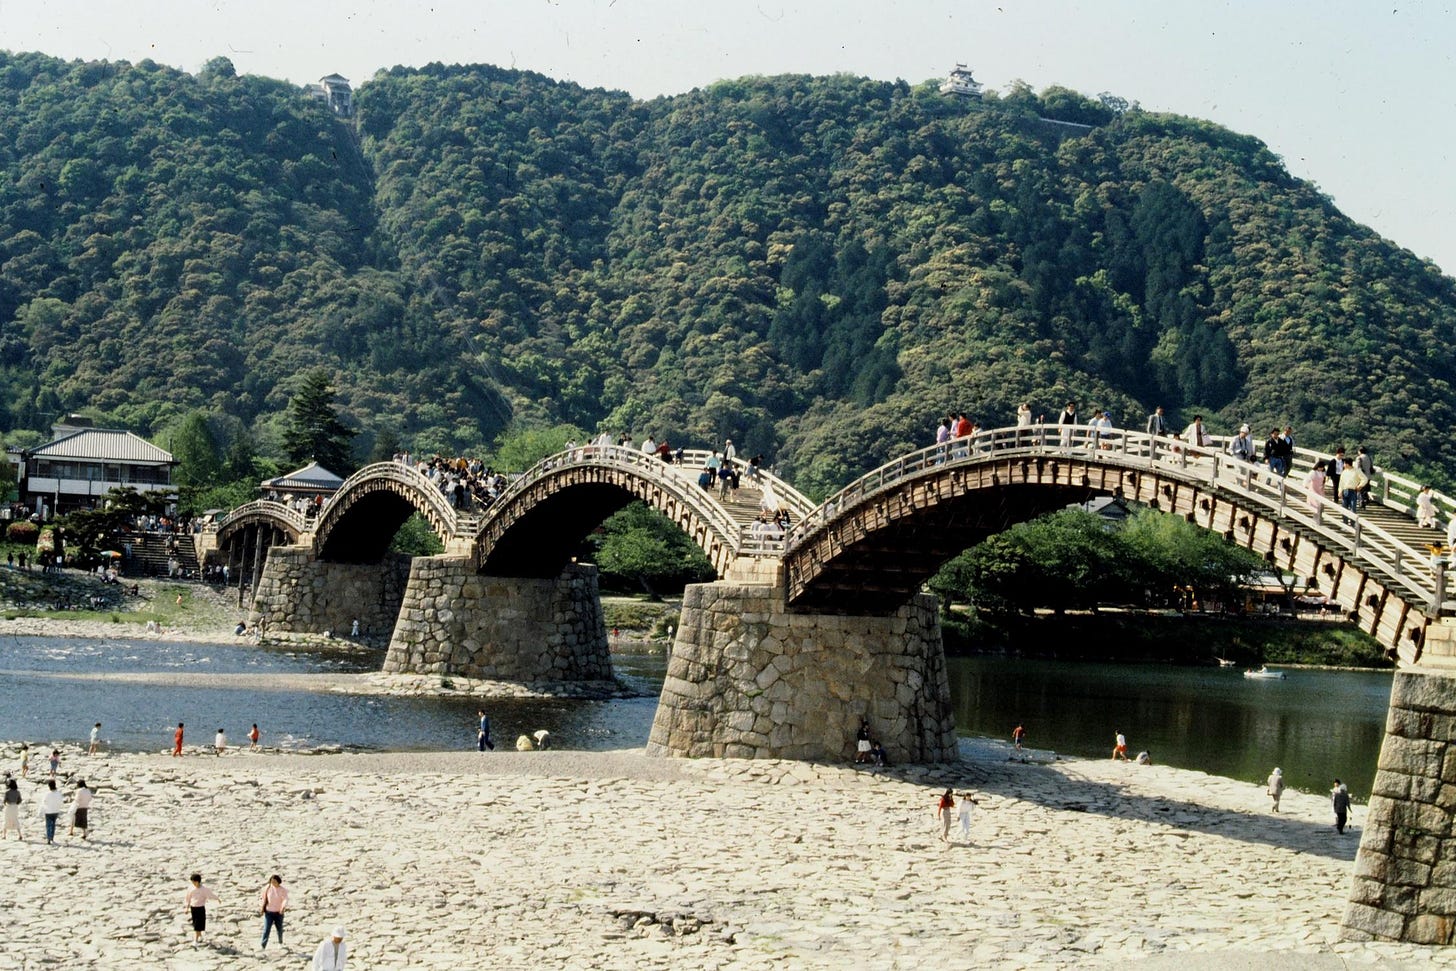 Kintai Bridge, Iwakuni. (Sorry for the poor quality, scanned picture ...